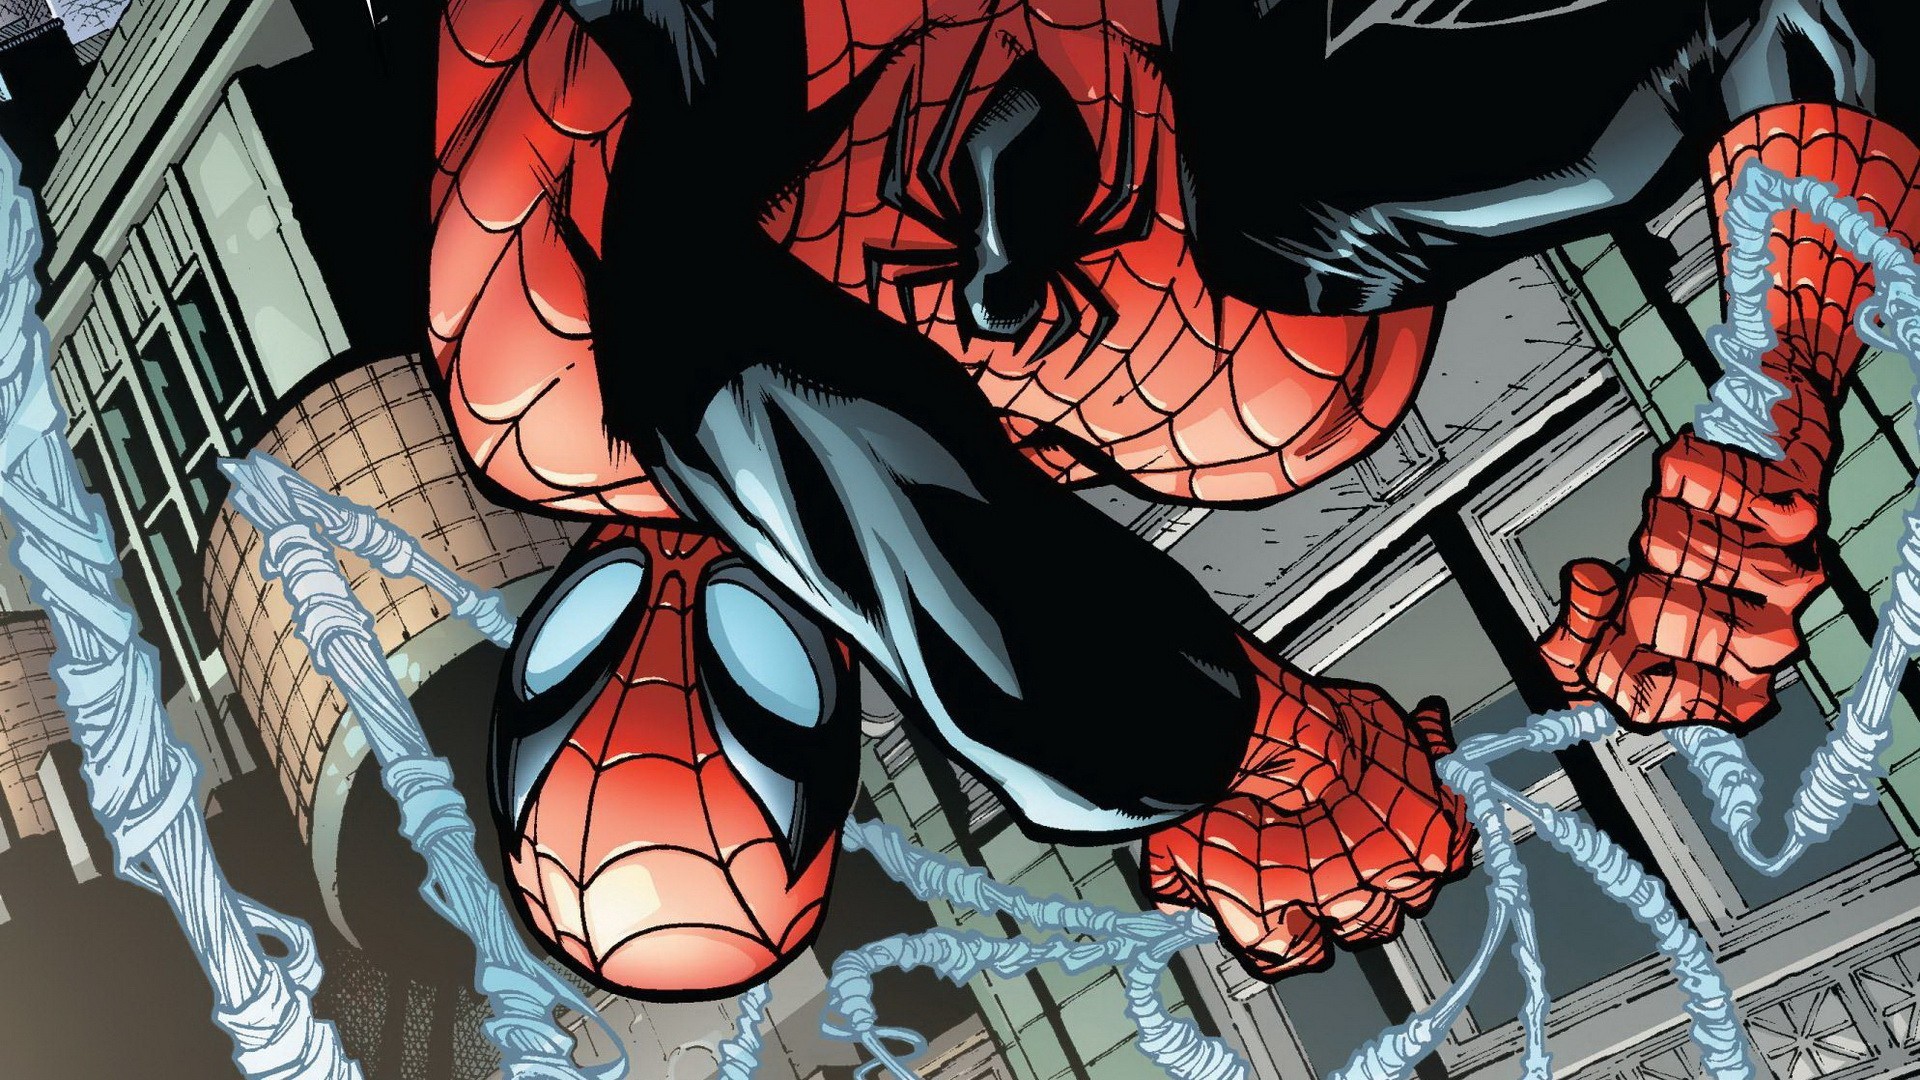 Superior Spiderman Wallpaper Hd 74 Pictures Images, Photos, Reviews